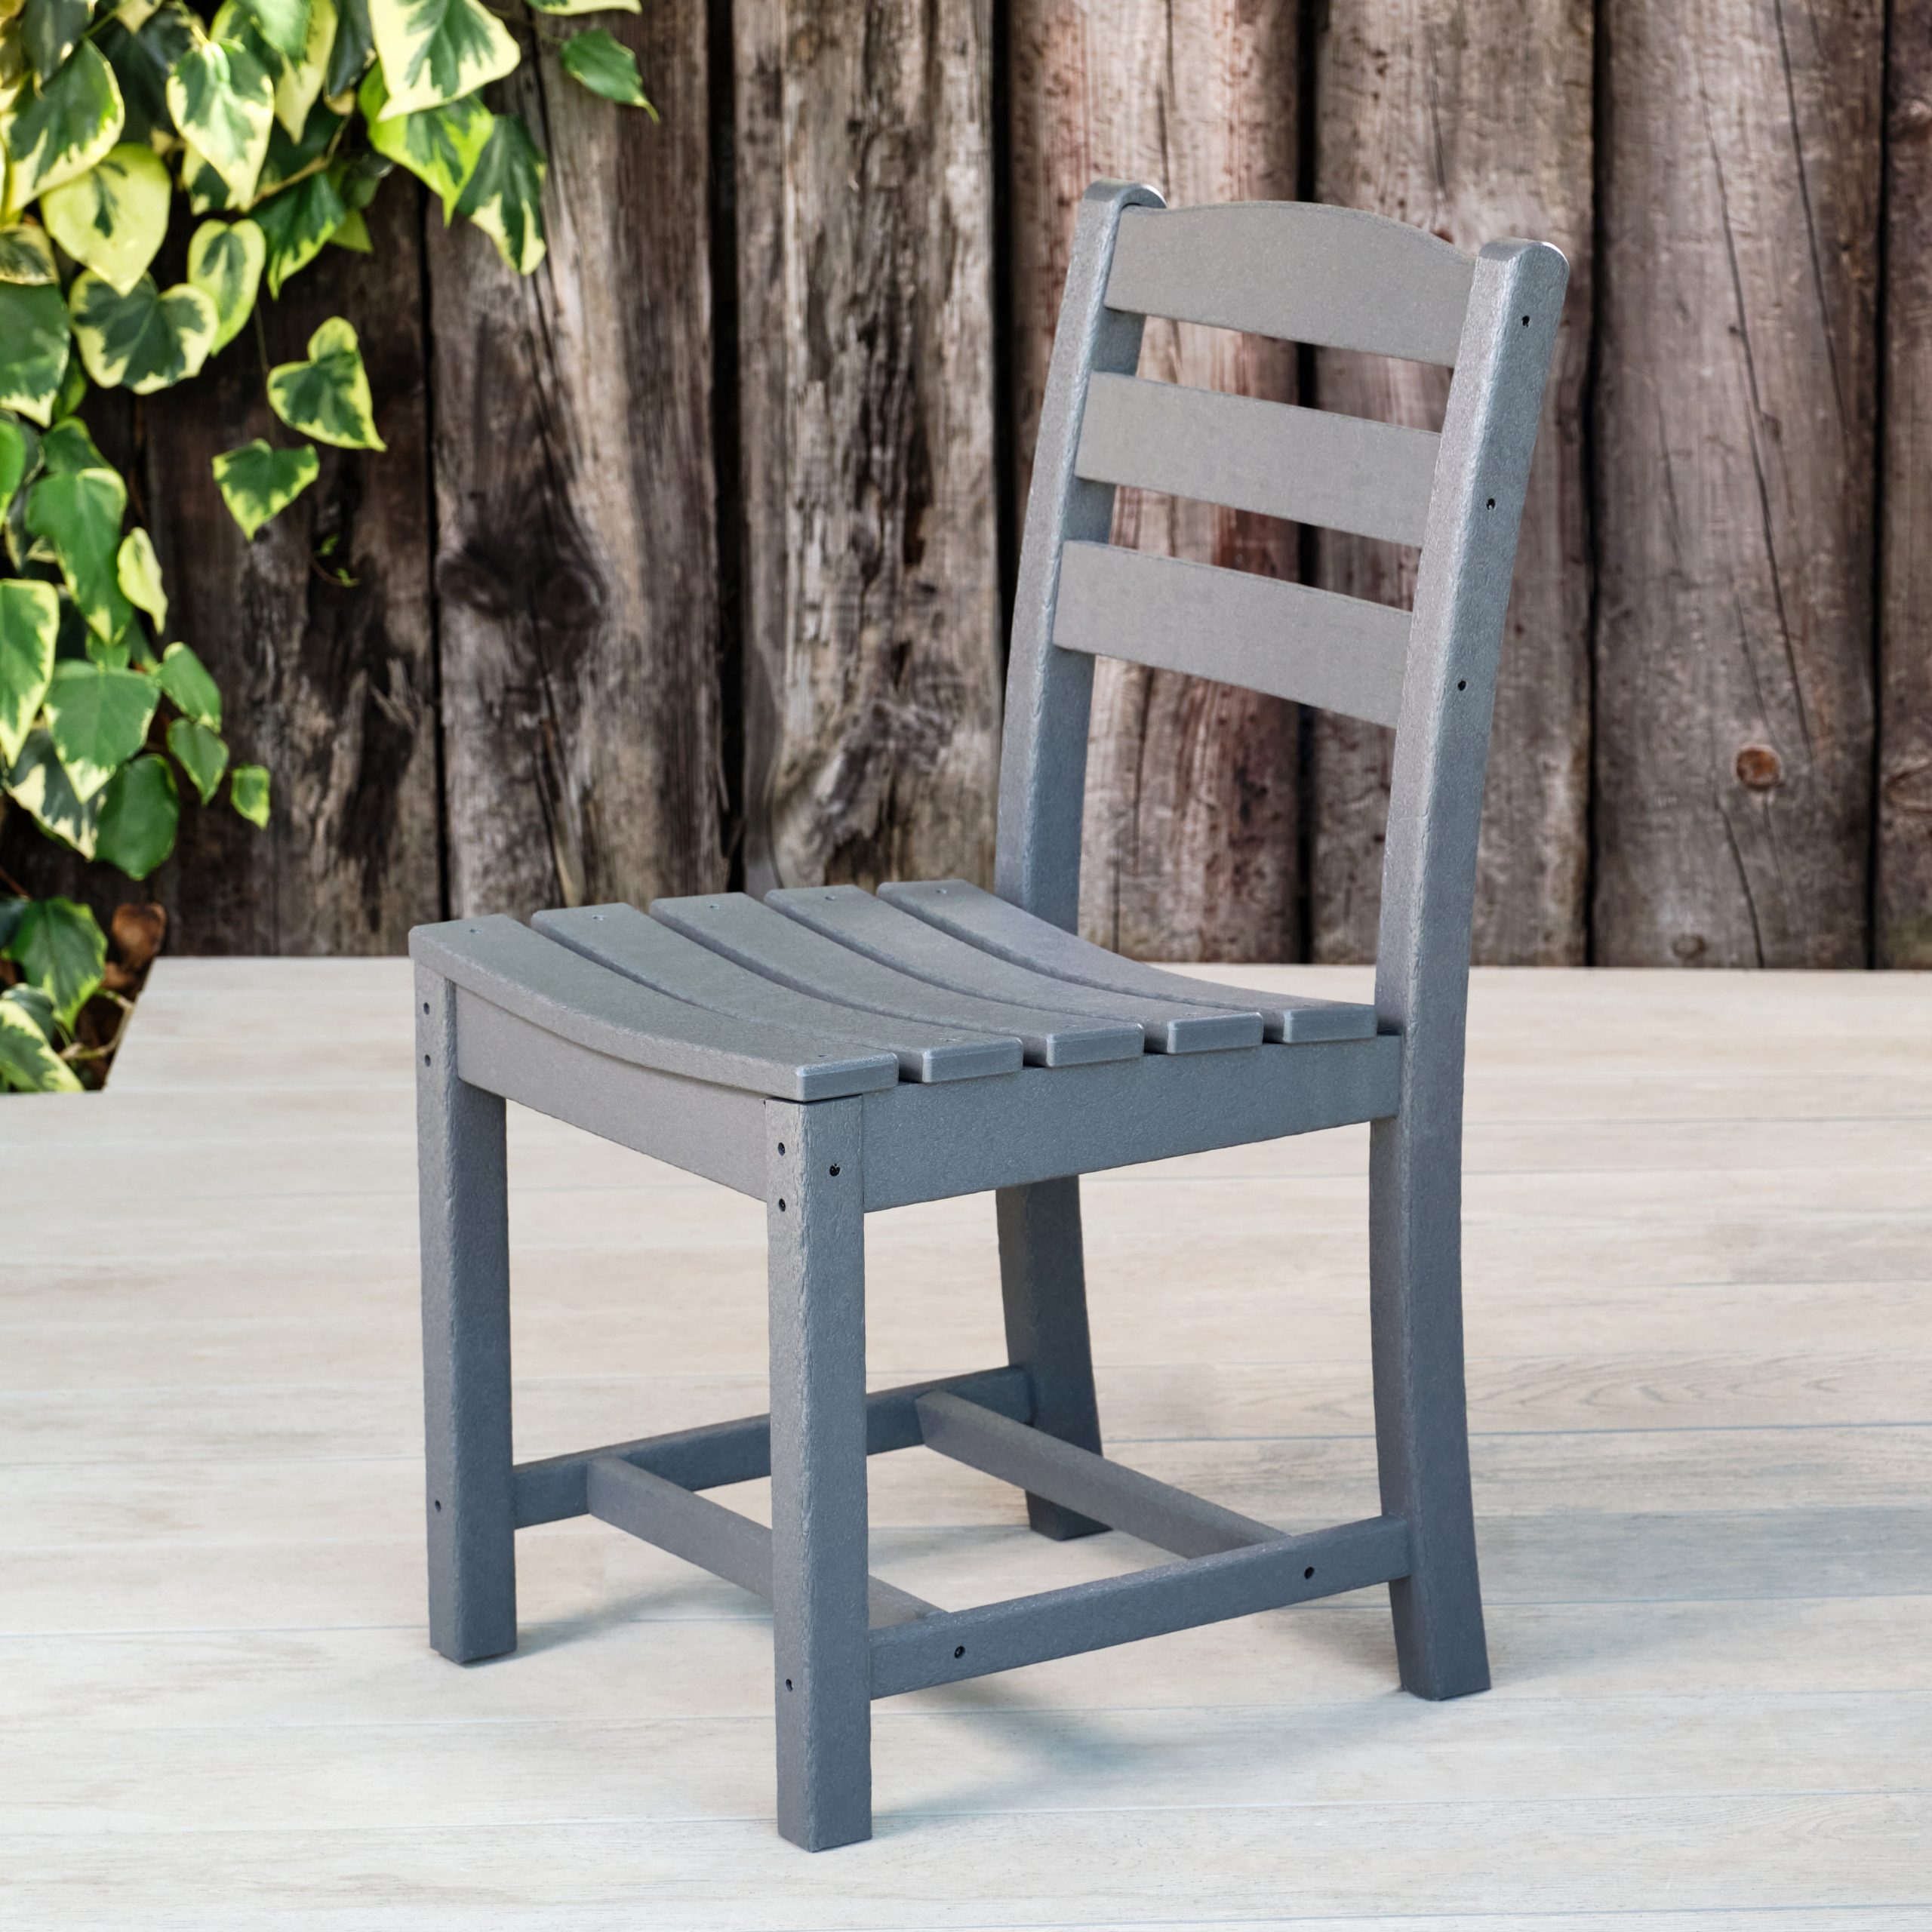 GD33Y Recycled Plastic Diner Chair Grey